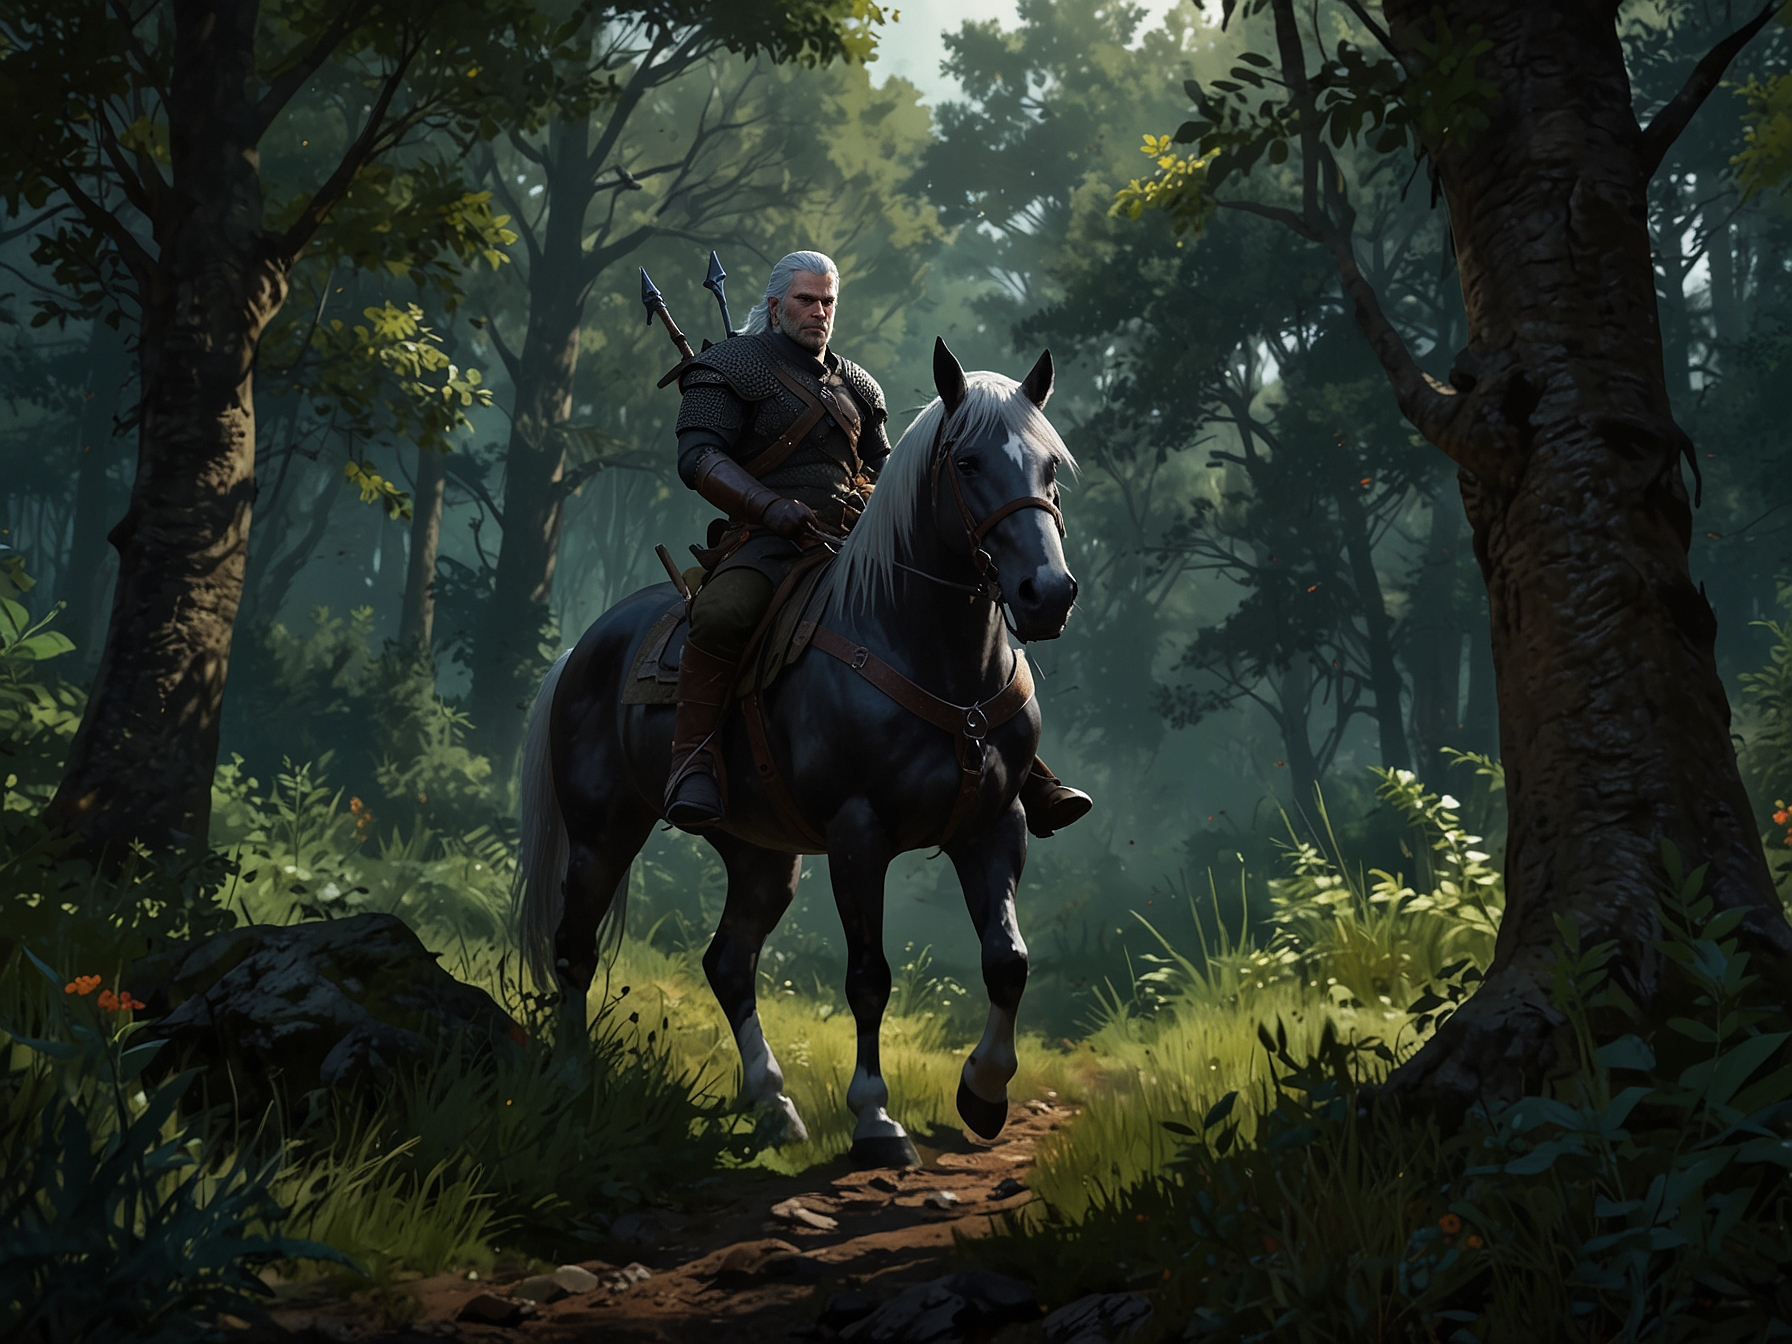 An image of 'The Witcher 3: Wild Hunt' featuring Geralt of Rivia riding through a lush, detailed open world, emphasizing the game's captivating narrative and immersive adventure, now available at a steep discount.